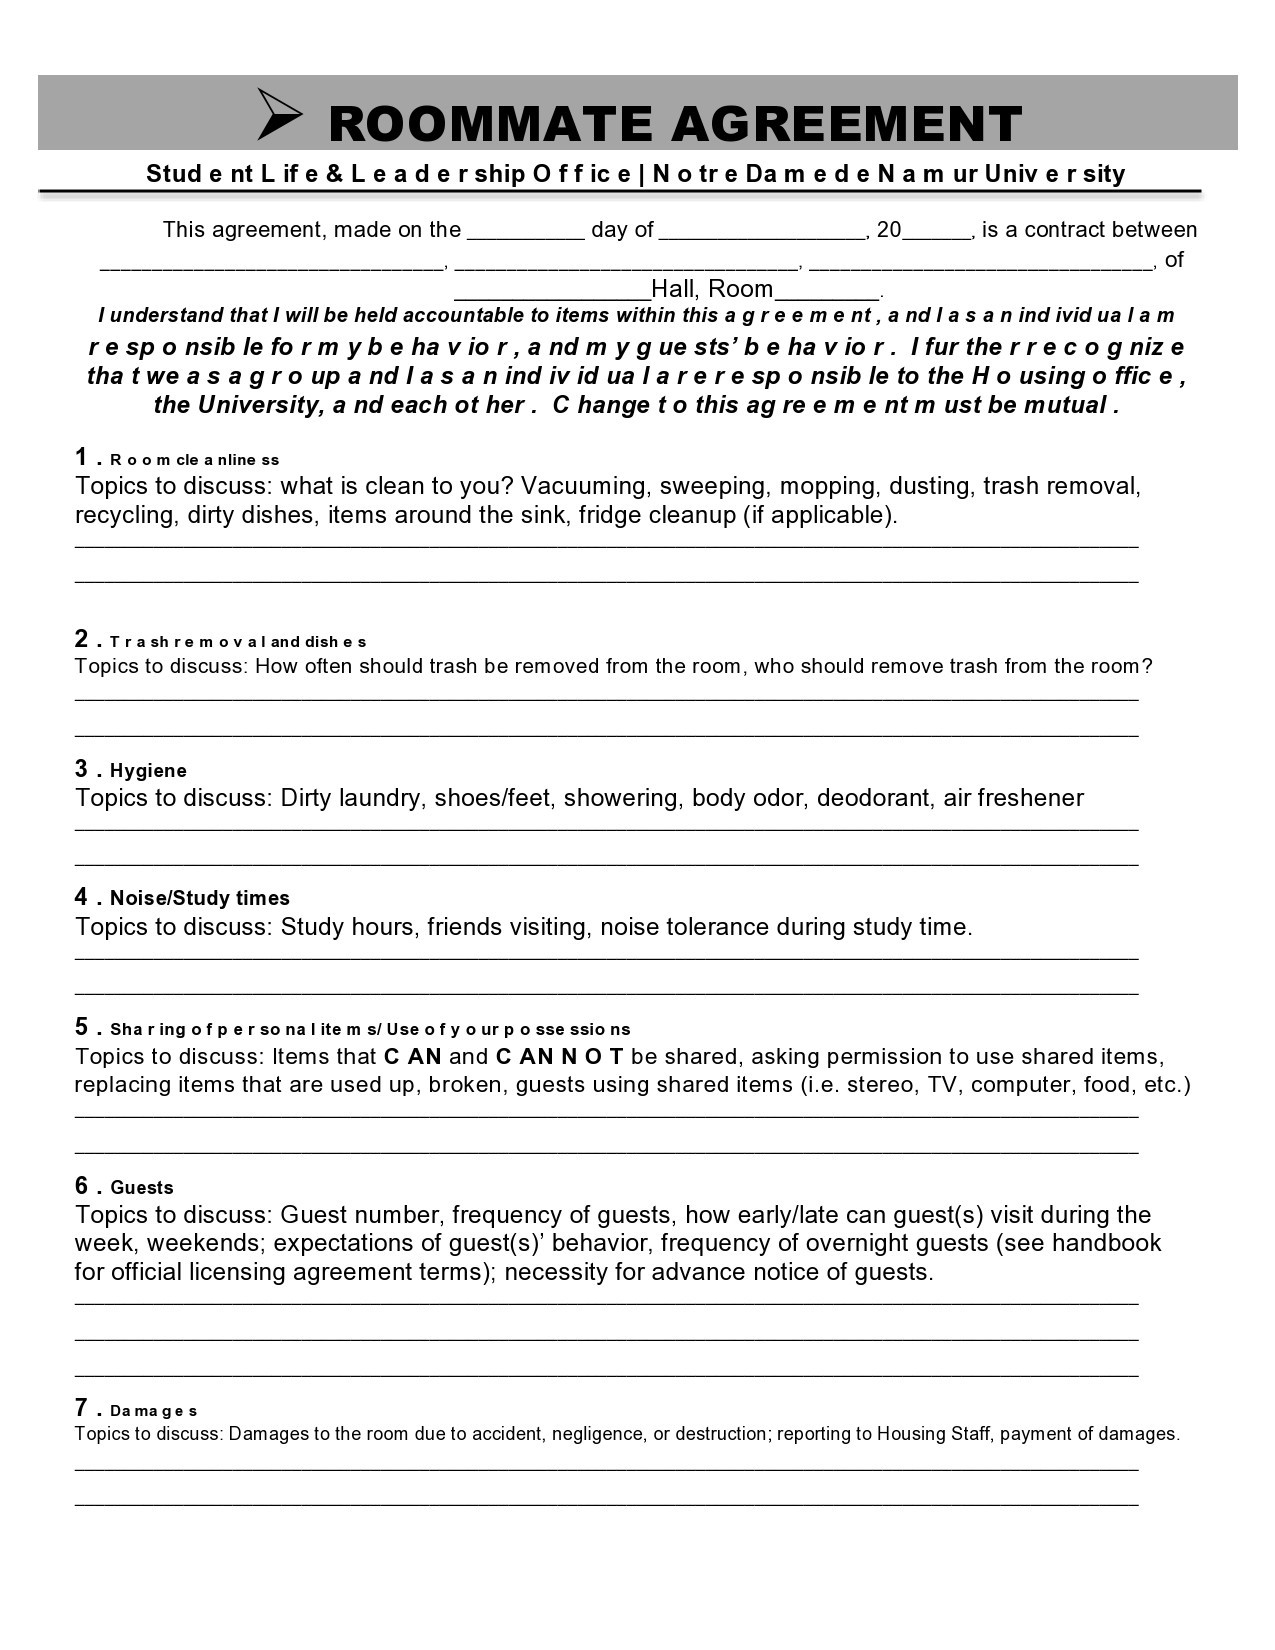 Free roommate agreement template 10